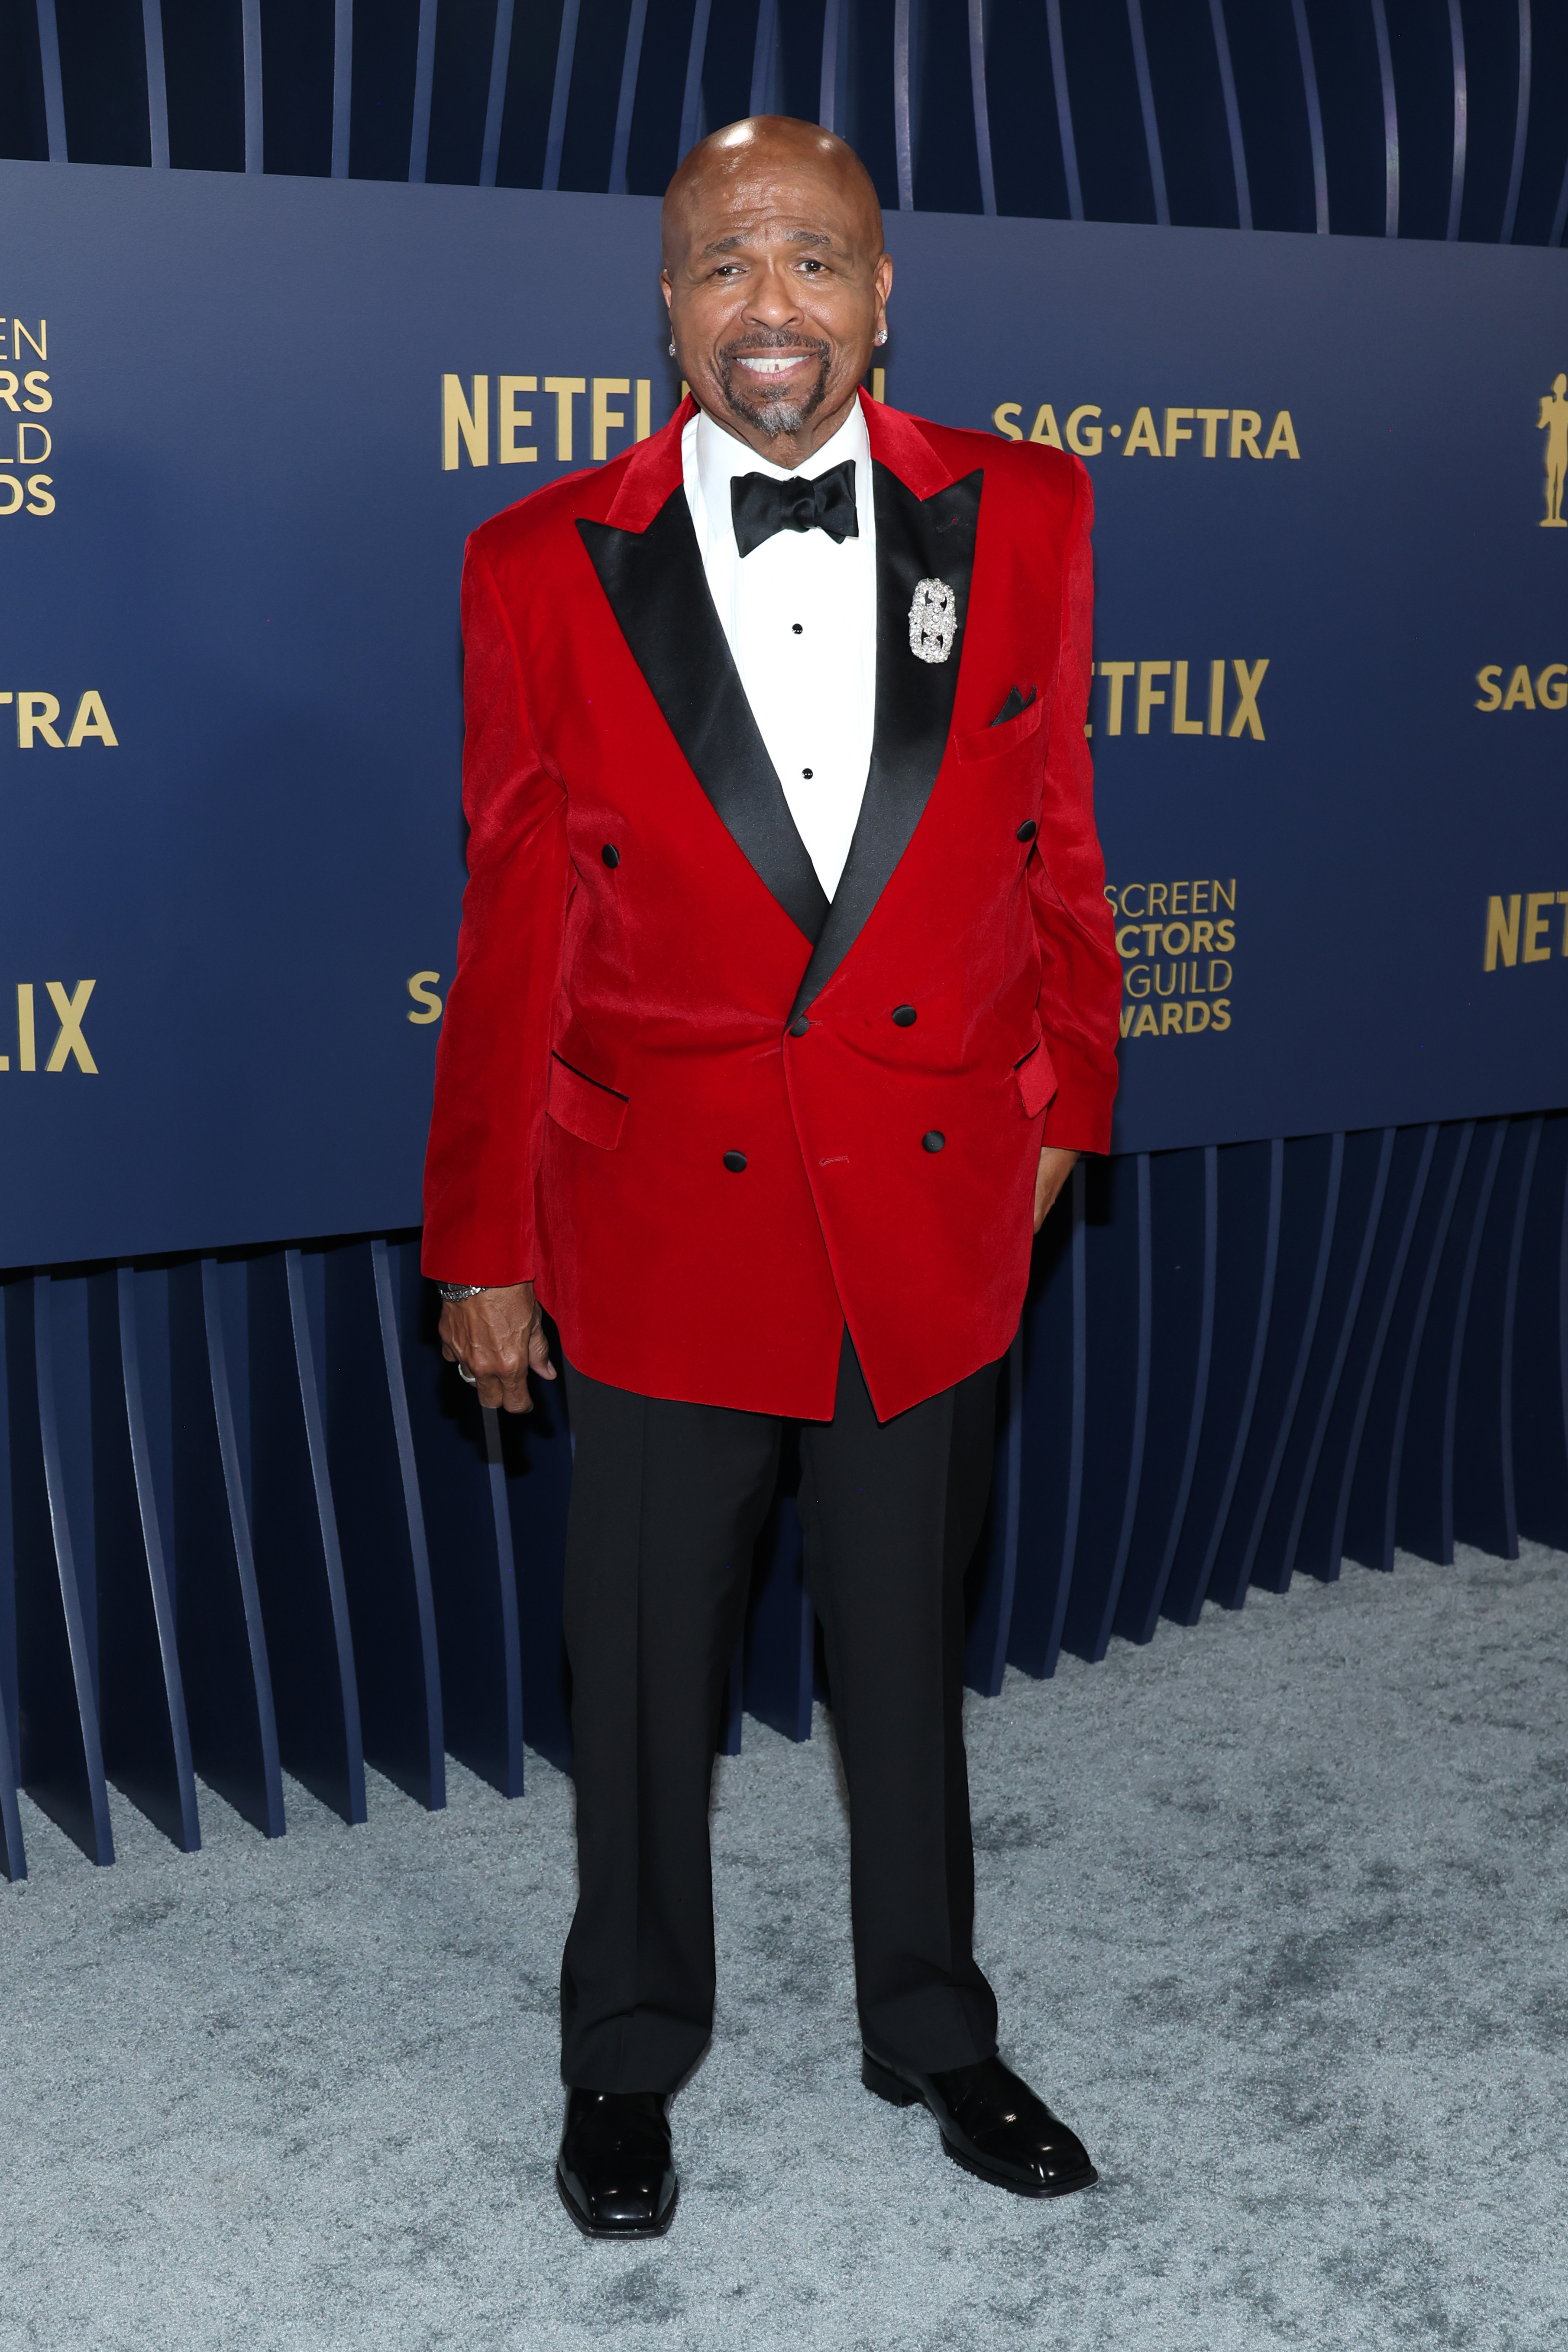 William in a red and black tuxedo with bow tie standing on event carpet